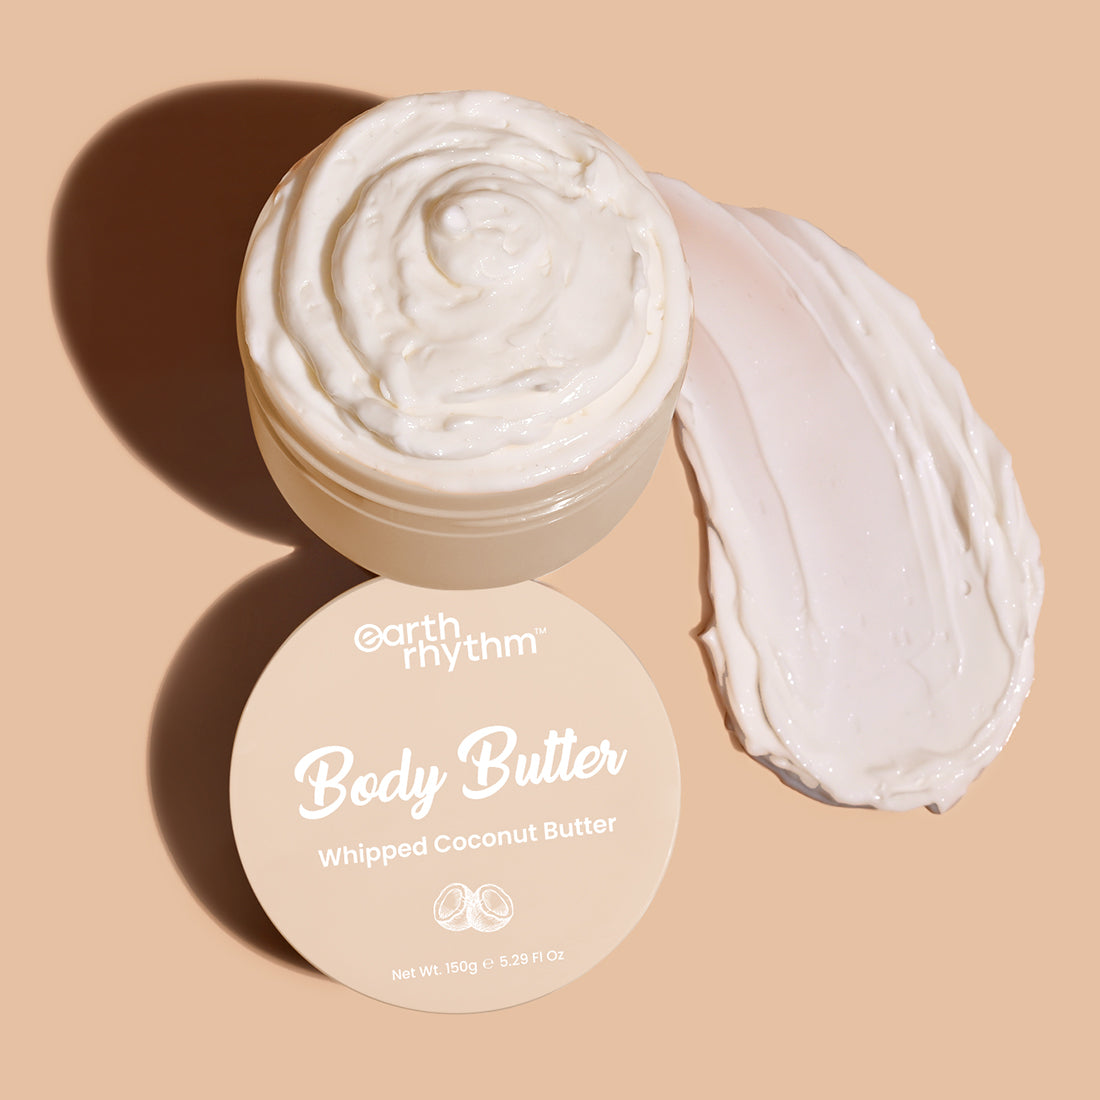 WHIPPED COCONUT BODY BUTTER